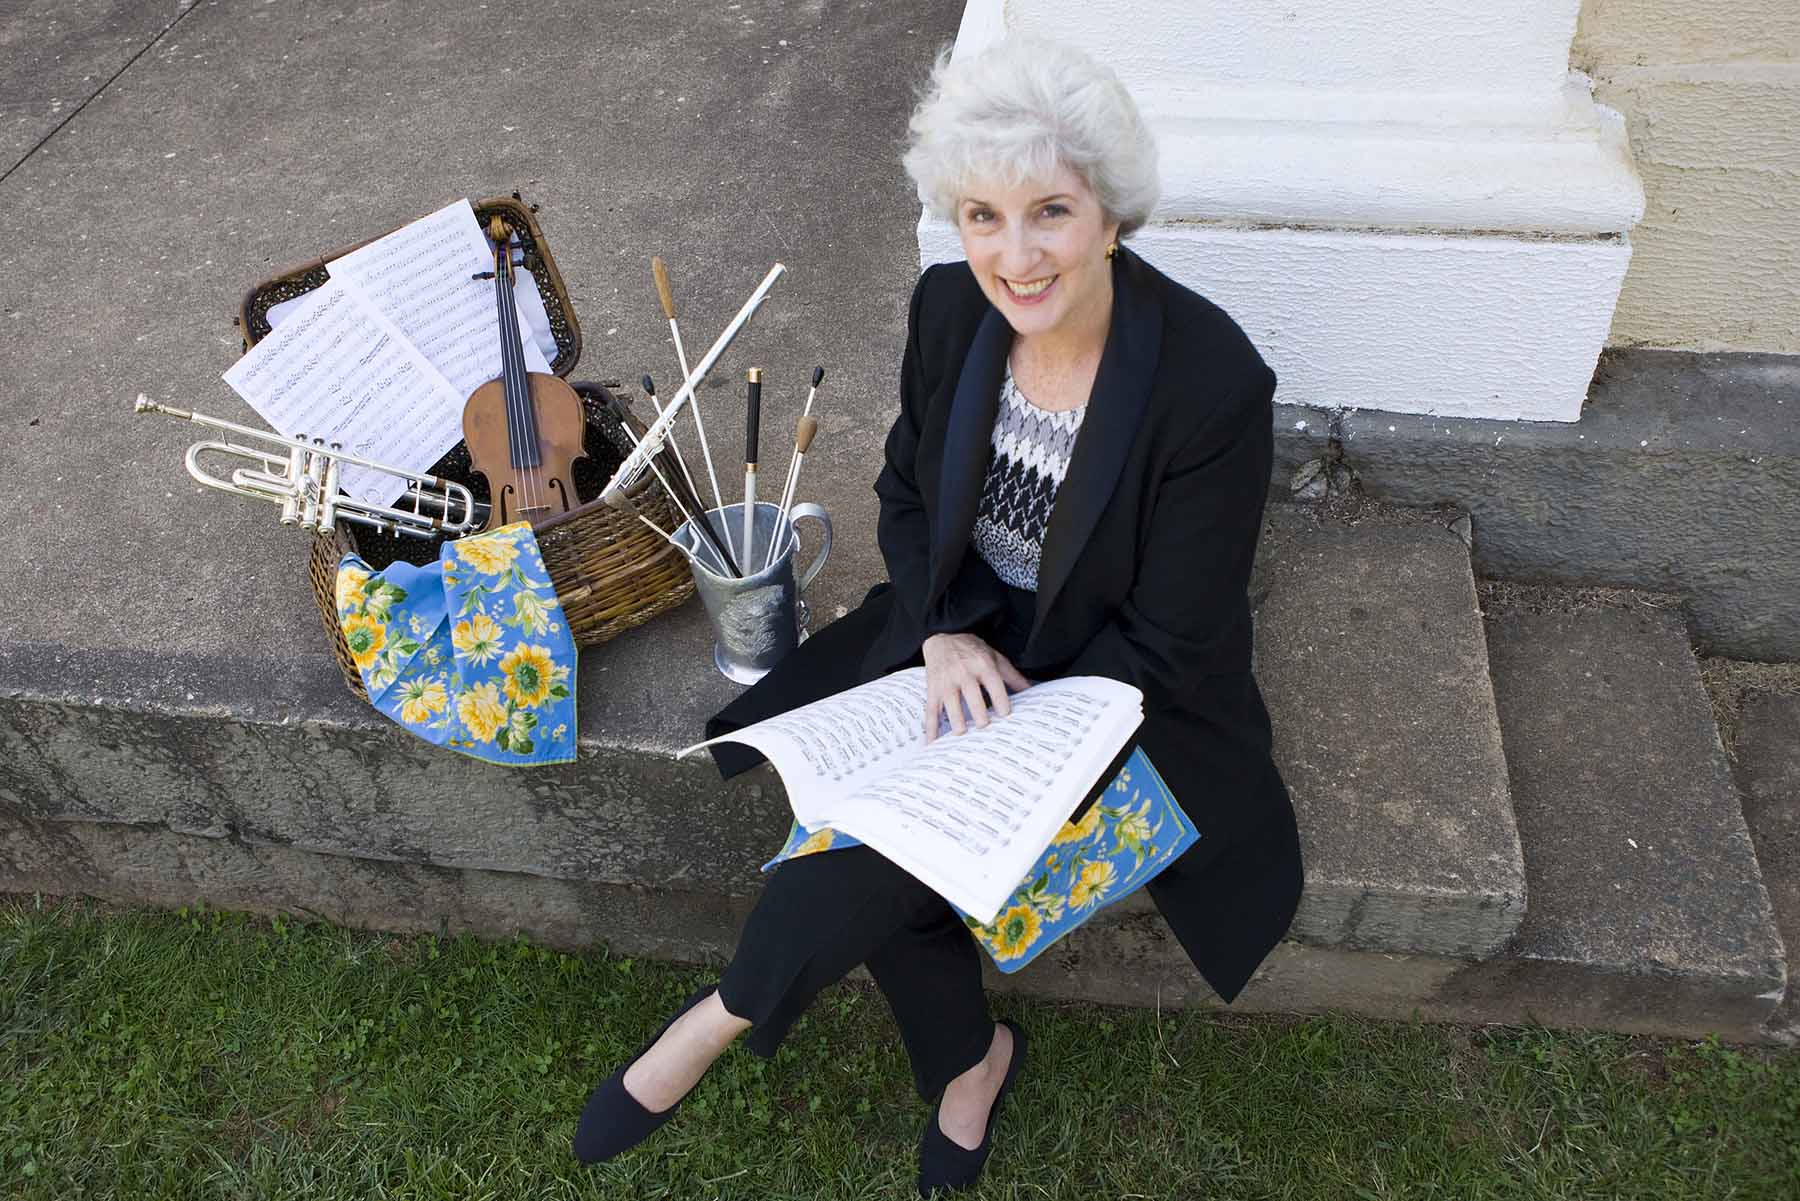 Kate Tamarkin sitting on concrete steps holding a music book with musical instruments in a wooden basket next to her